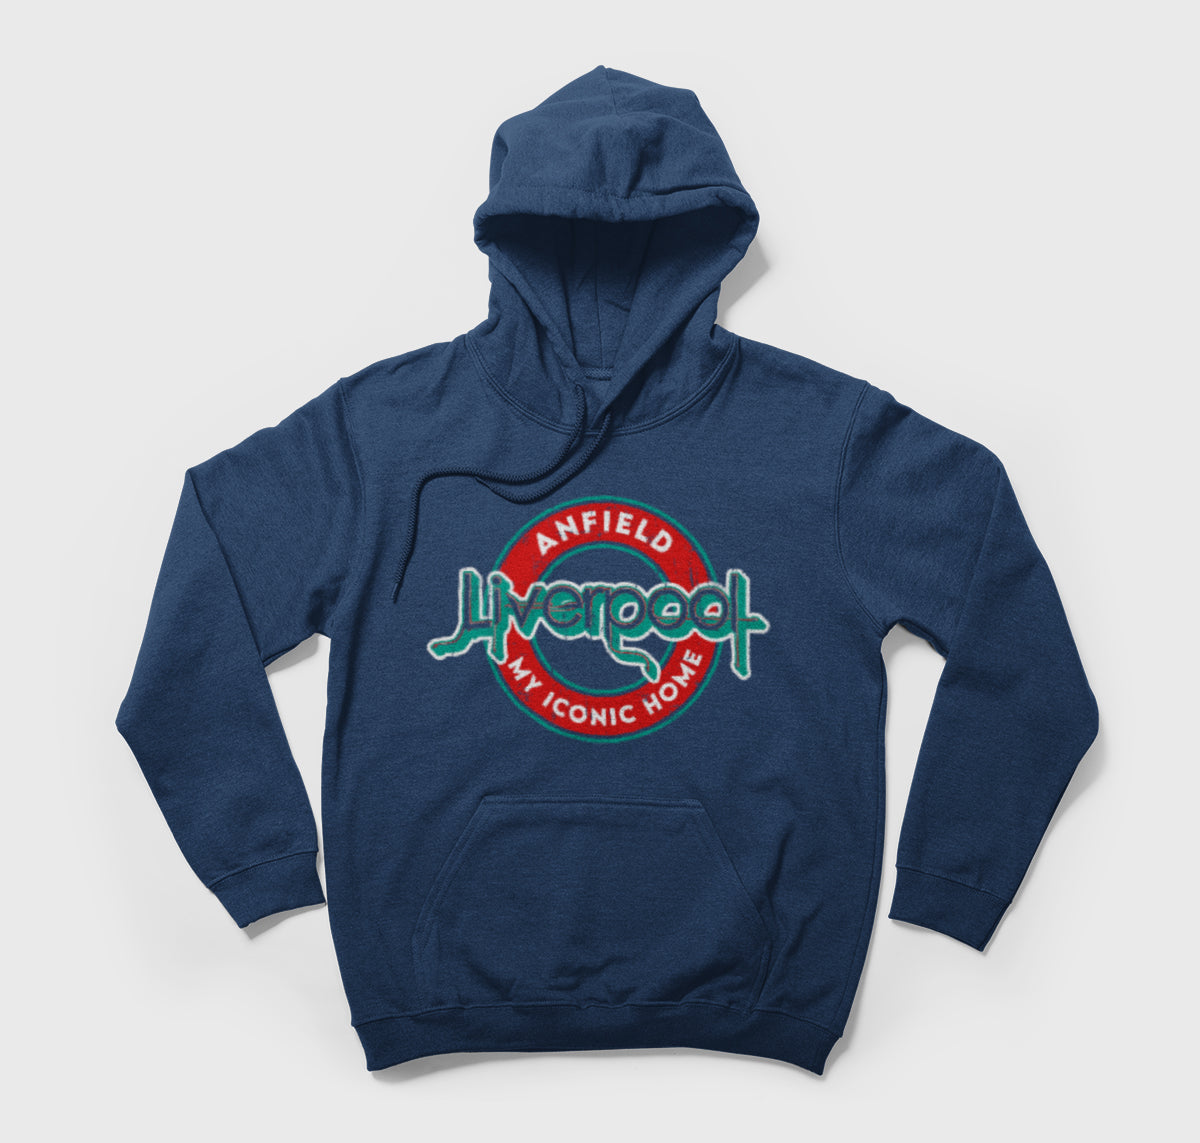 Anfield Liverpool My Iconic Home Hoodie